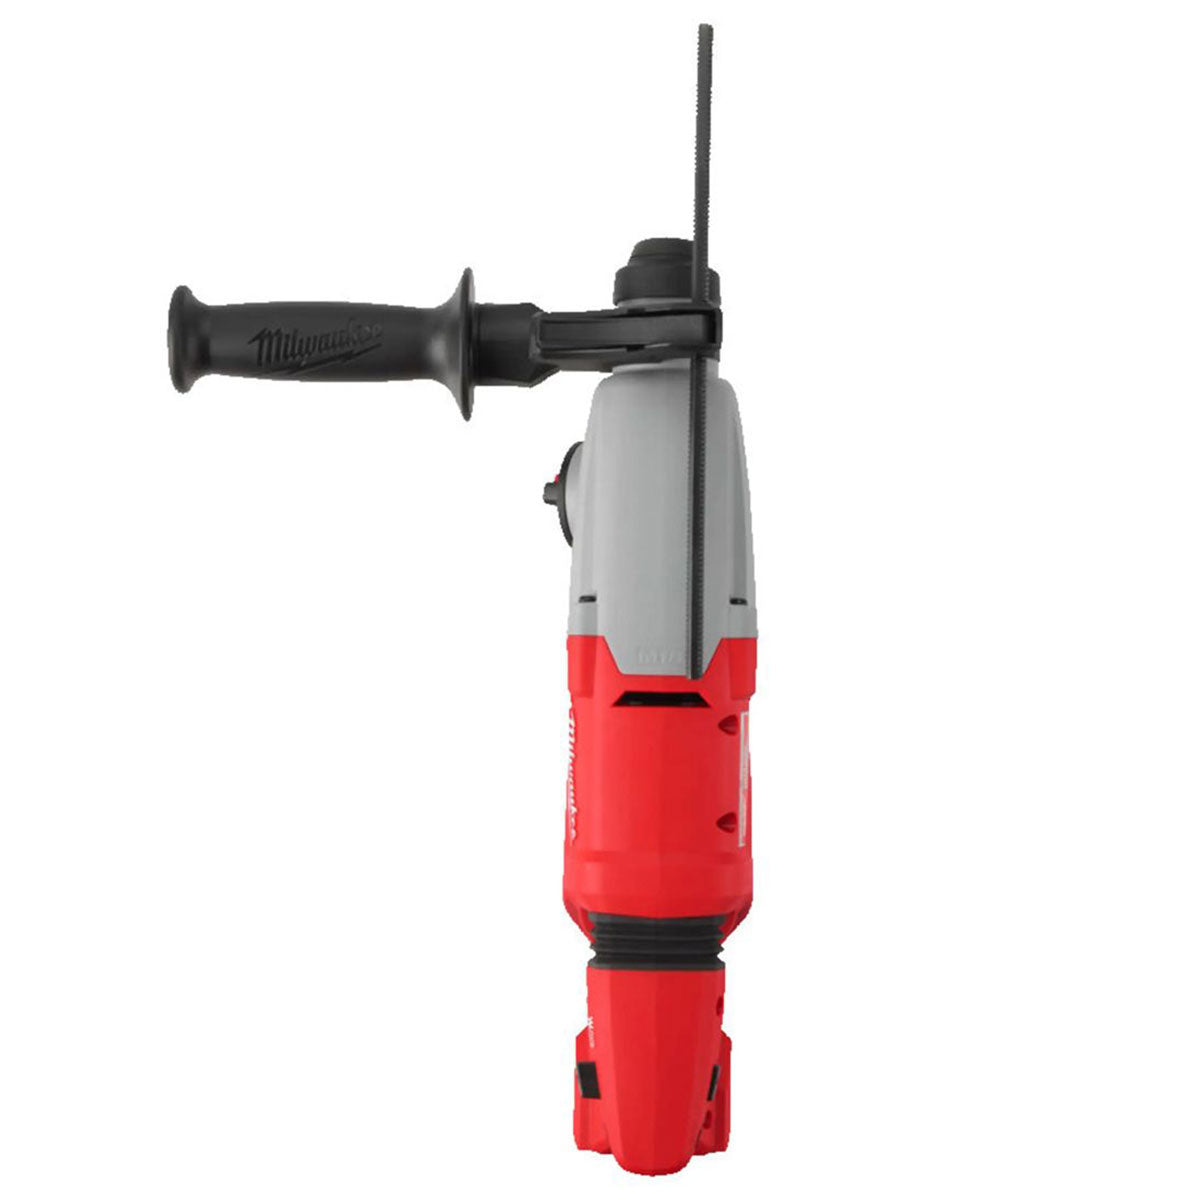 Milwaukee M18BLHACD26-0 18V Brushless SDS+ D-Handle Rotary Hammer Drill Body Only 4933492483